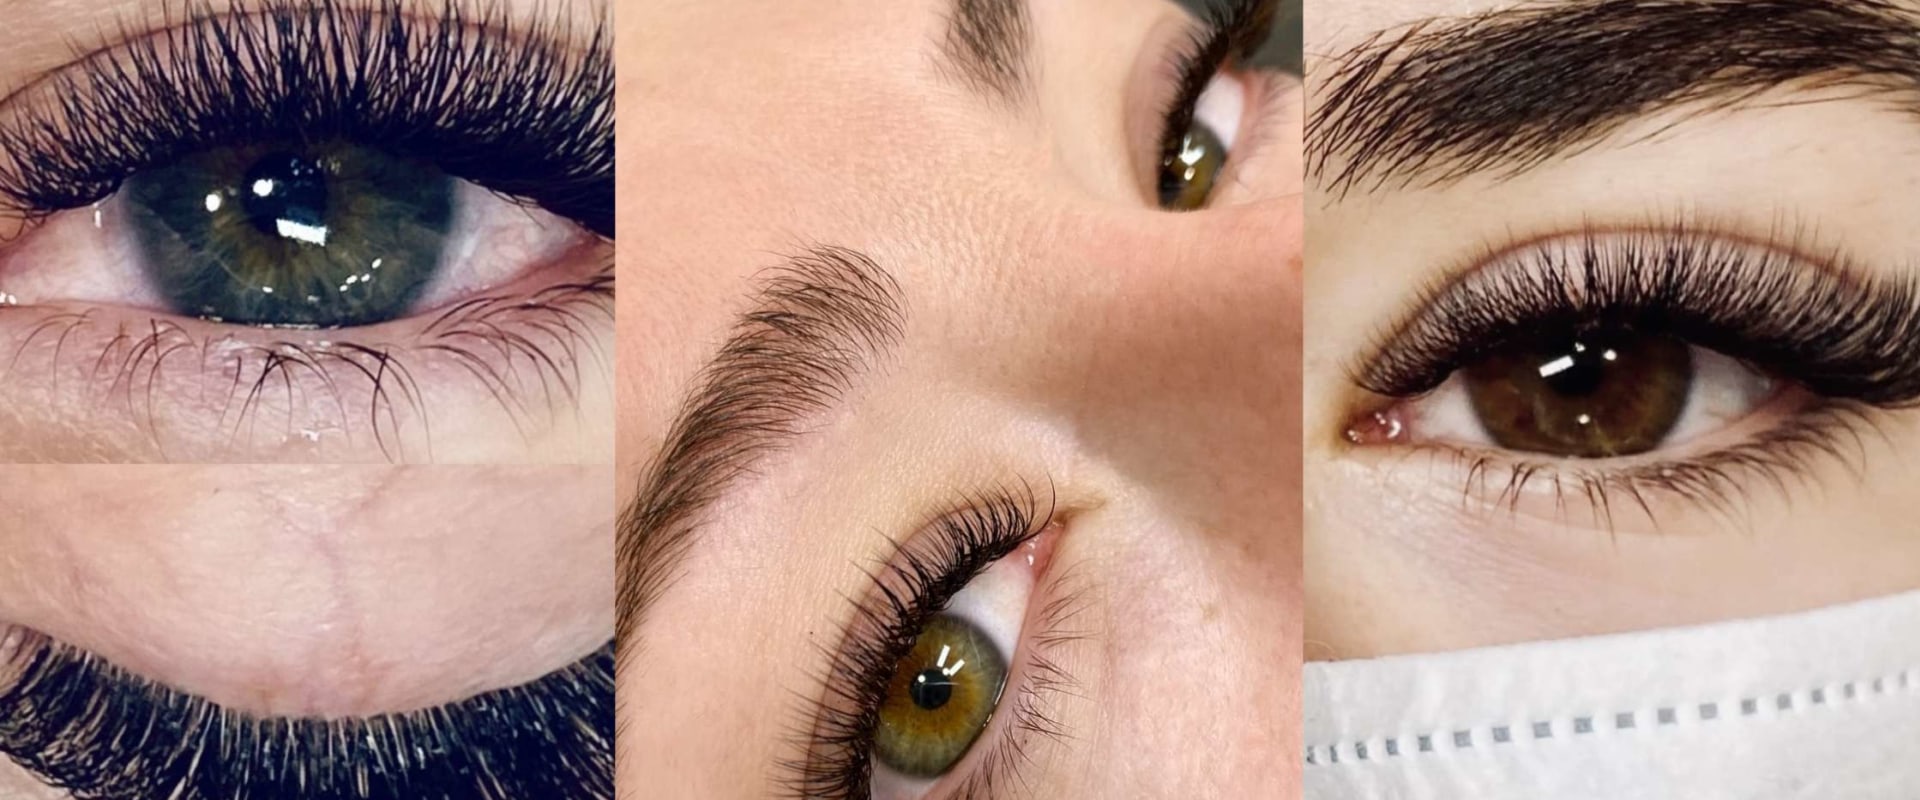 What type of business is eyelash extensions?